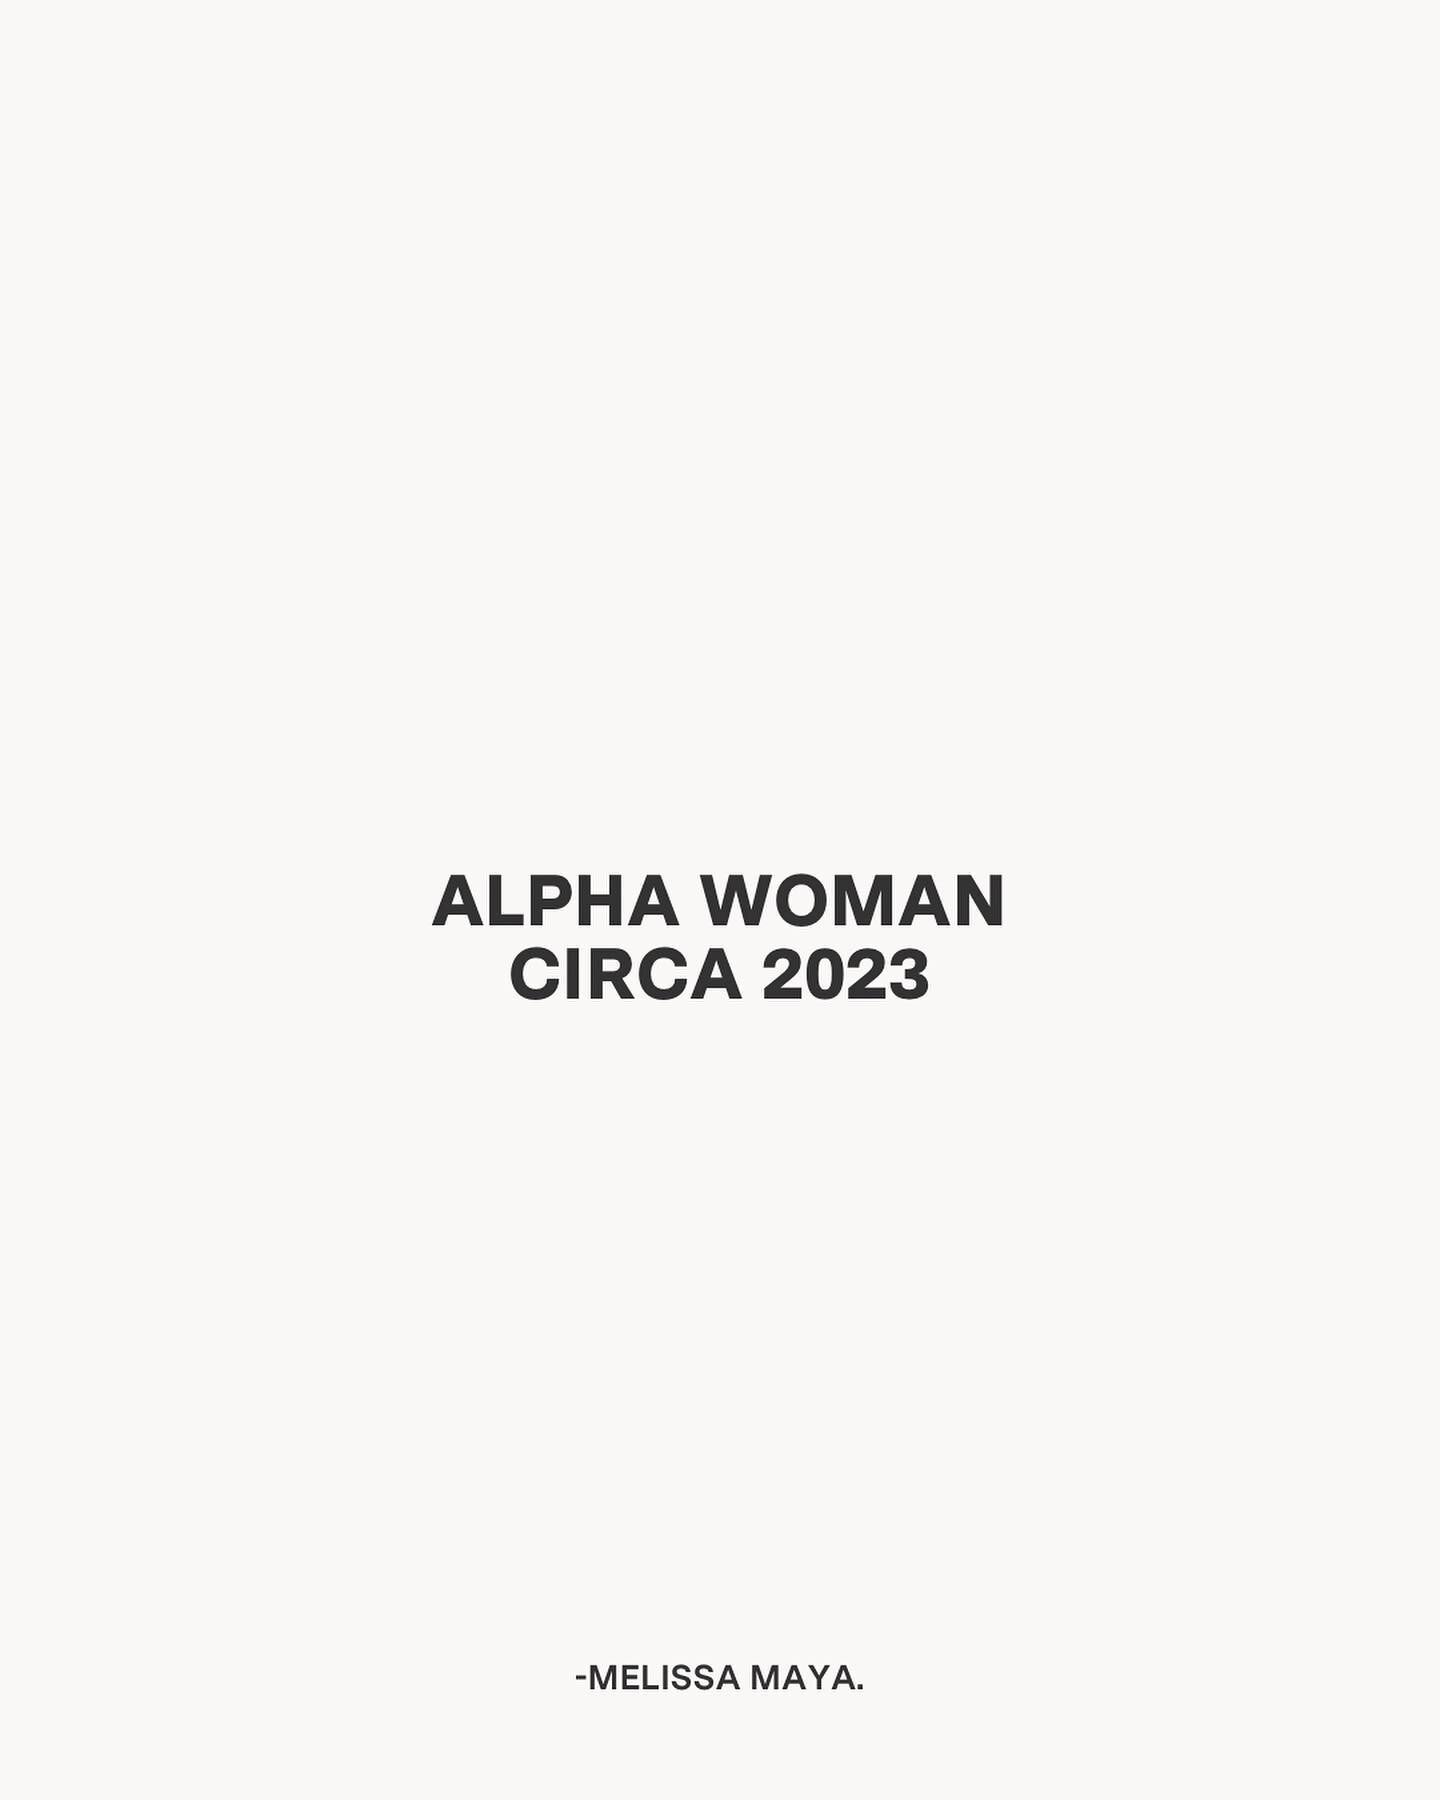 RIP THE ALPHA WOMAN.
or-what we&rsquo;ve known her to be. 

when we&rsquo;ve used this term before we&rsquo;ve used it to trophy women who trailblaze. we&rsquo;ve let it be an excuse for women to be cruel. we&rsquo;ve glorified and even fetishized a 